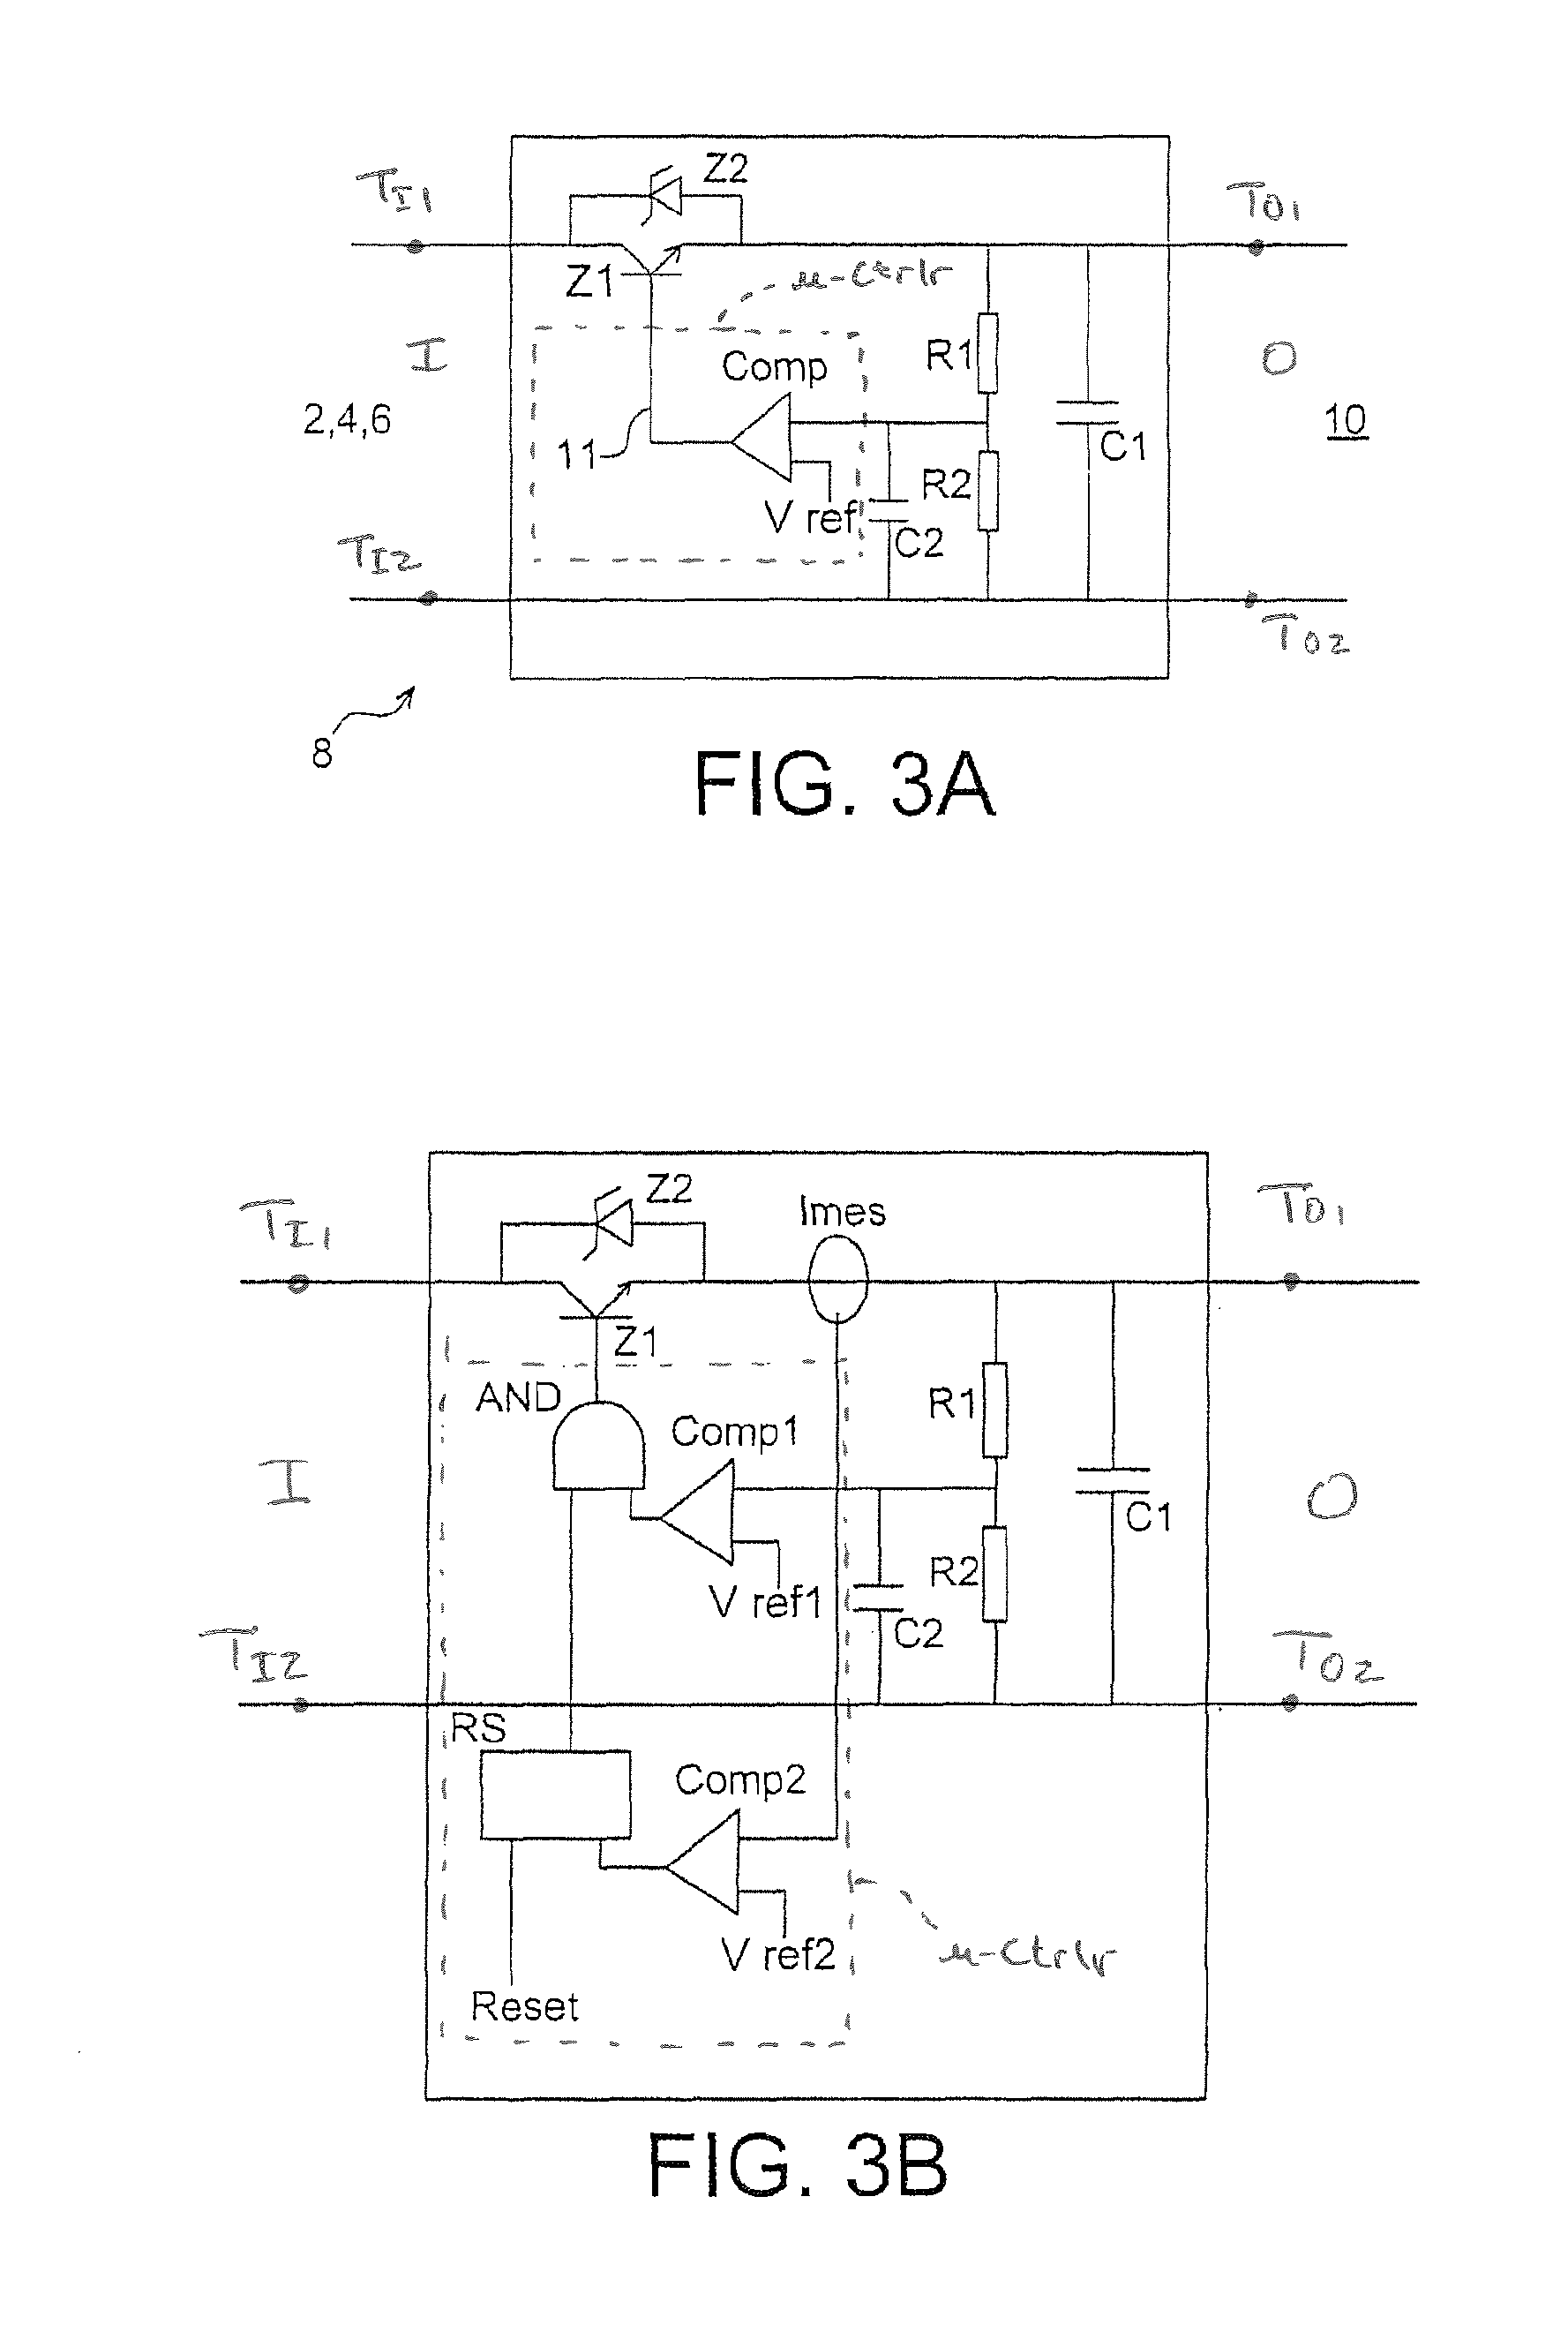 Voltage limiter and protection of a photovoltaic module